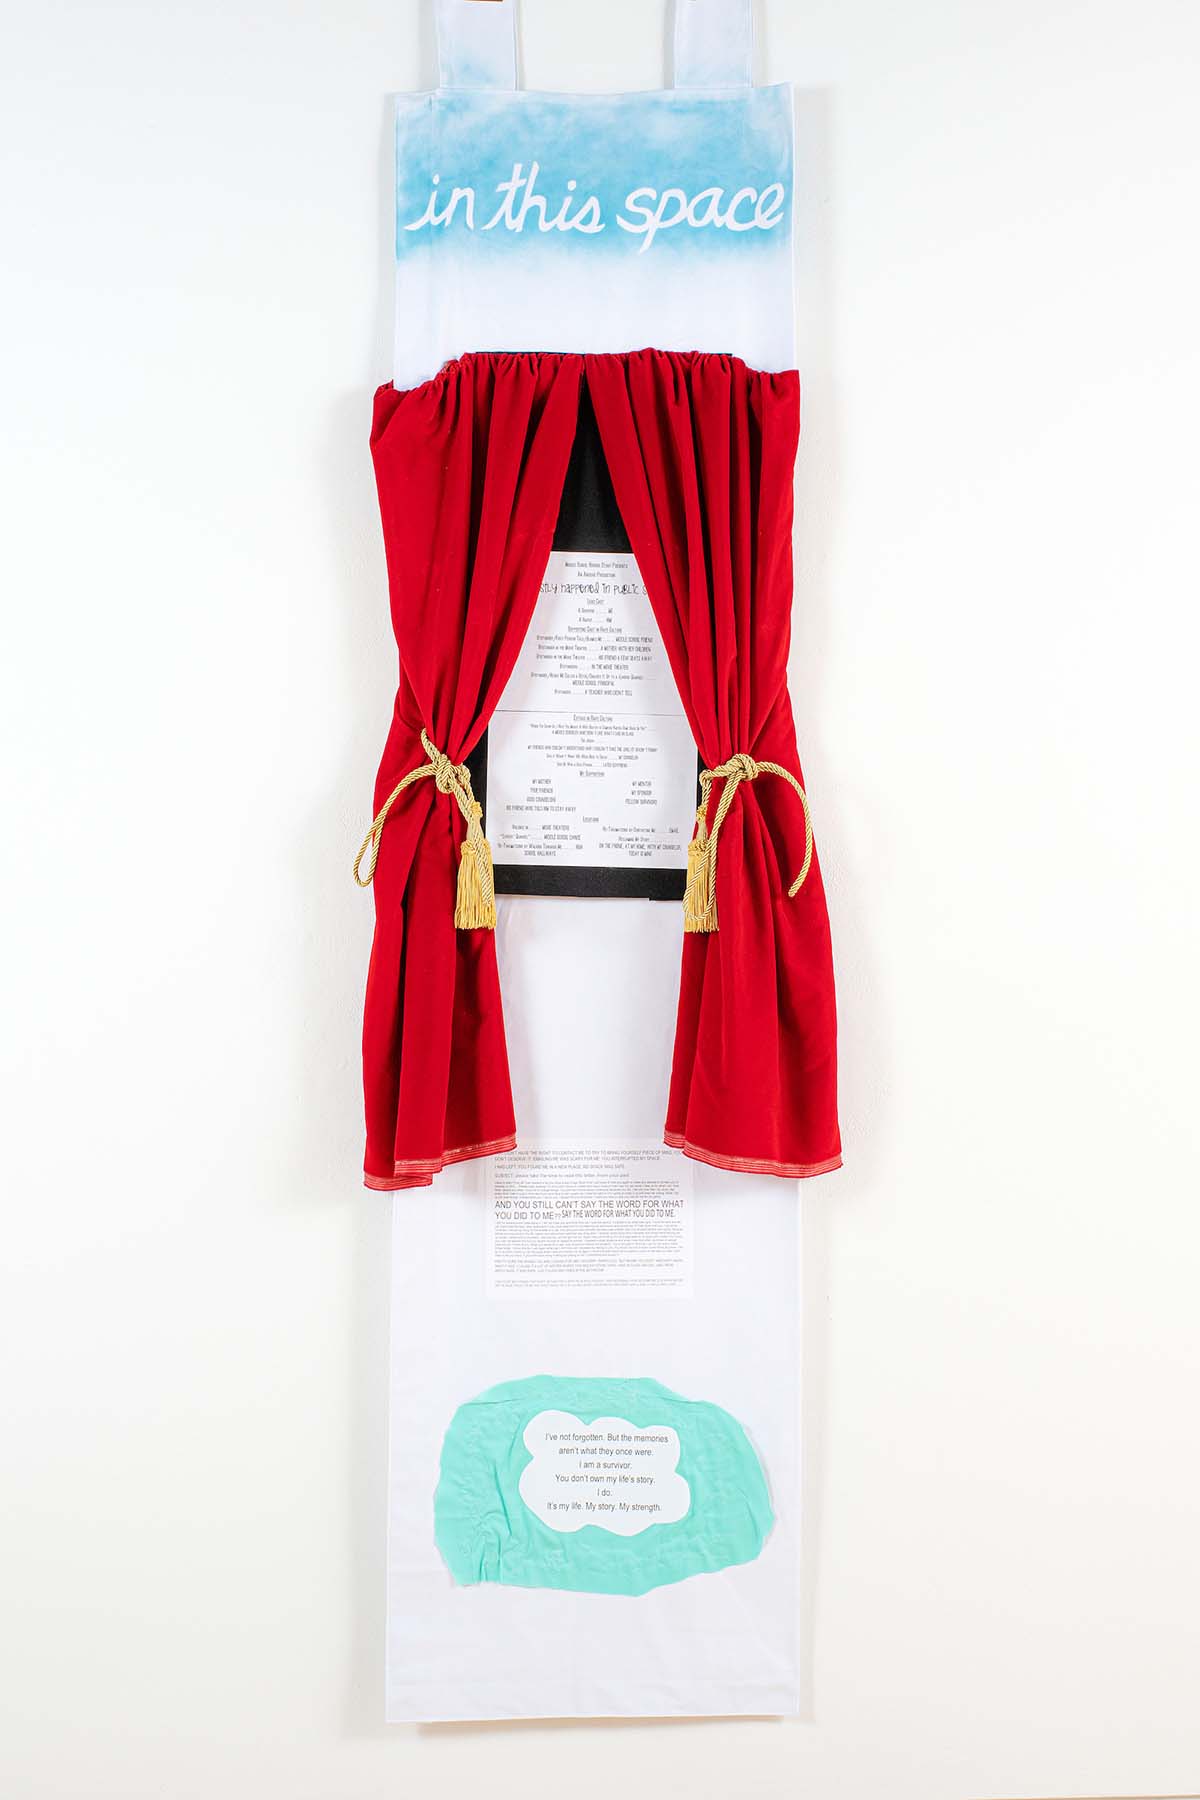 Photo of physical exhibit from the 'In This Space: Disrupted' art gallery depicting a stage with curtains and a credits listing for 'An Abusive Production'